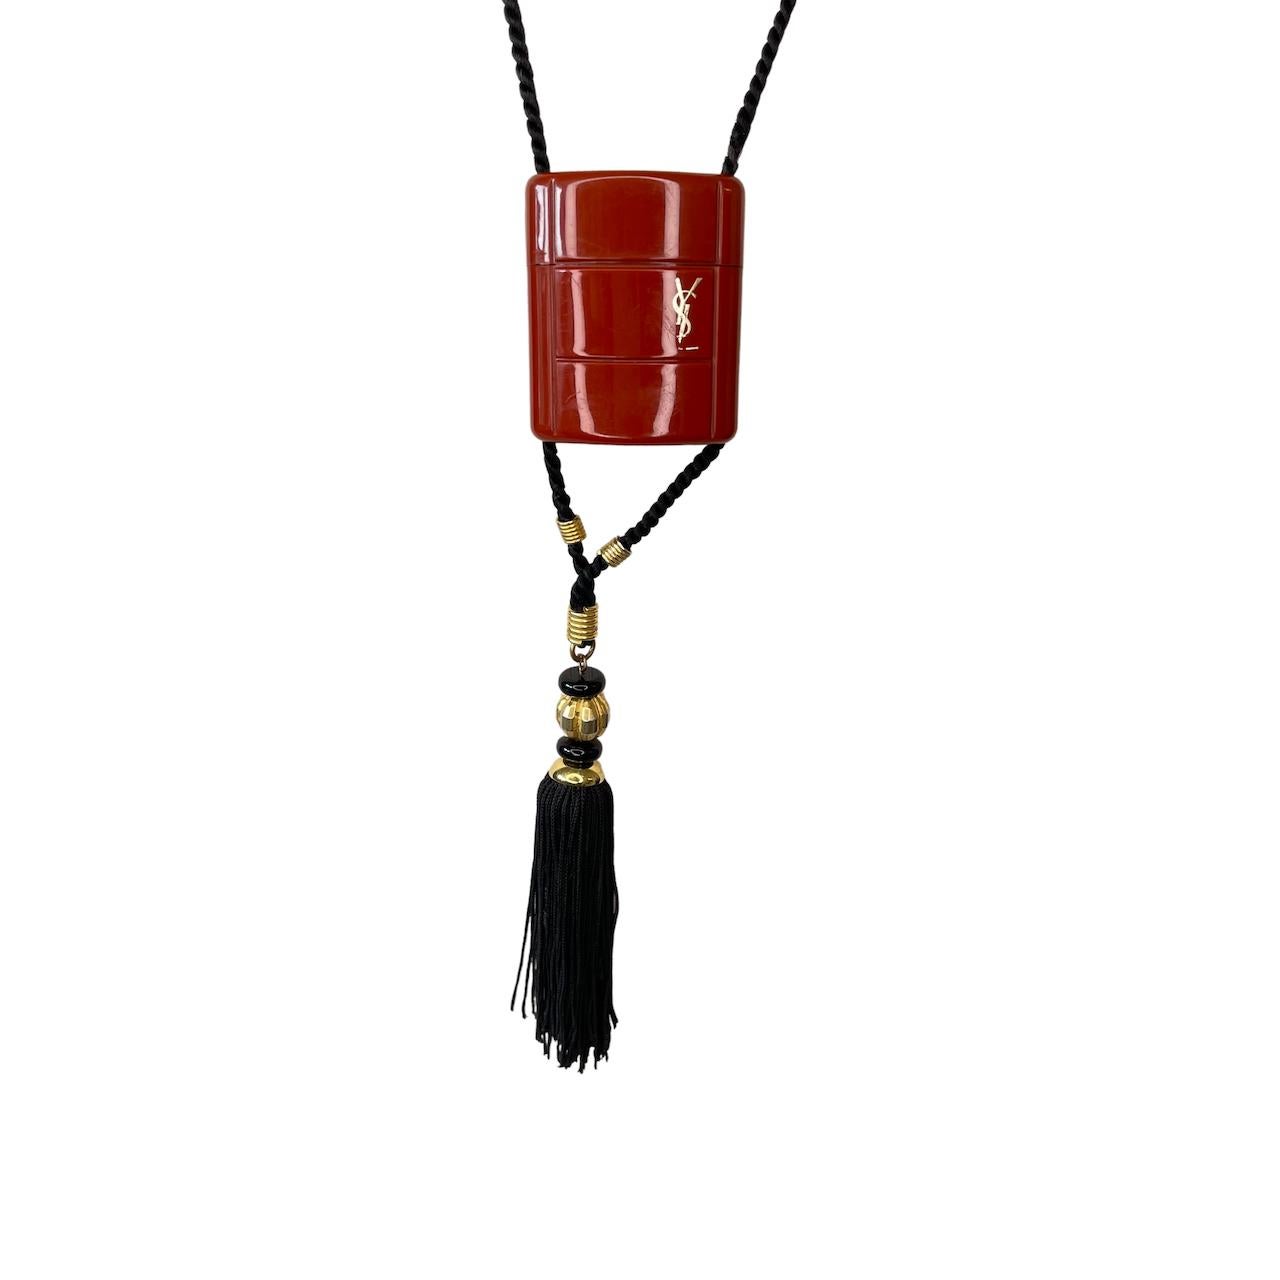 Saint Laurent, iconic, Opium perfume, pendent. Miniature, Opium perfume, flask, is made of an imitation Cinnebar, strung onto a black cord with a black tassel mixed with gold thread. Still contains some of the perfume in the flask.

COLOR: